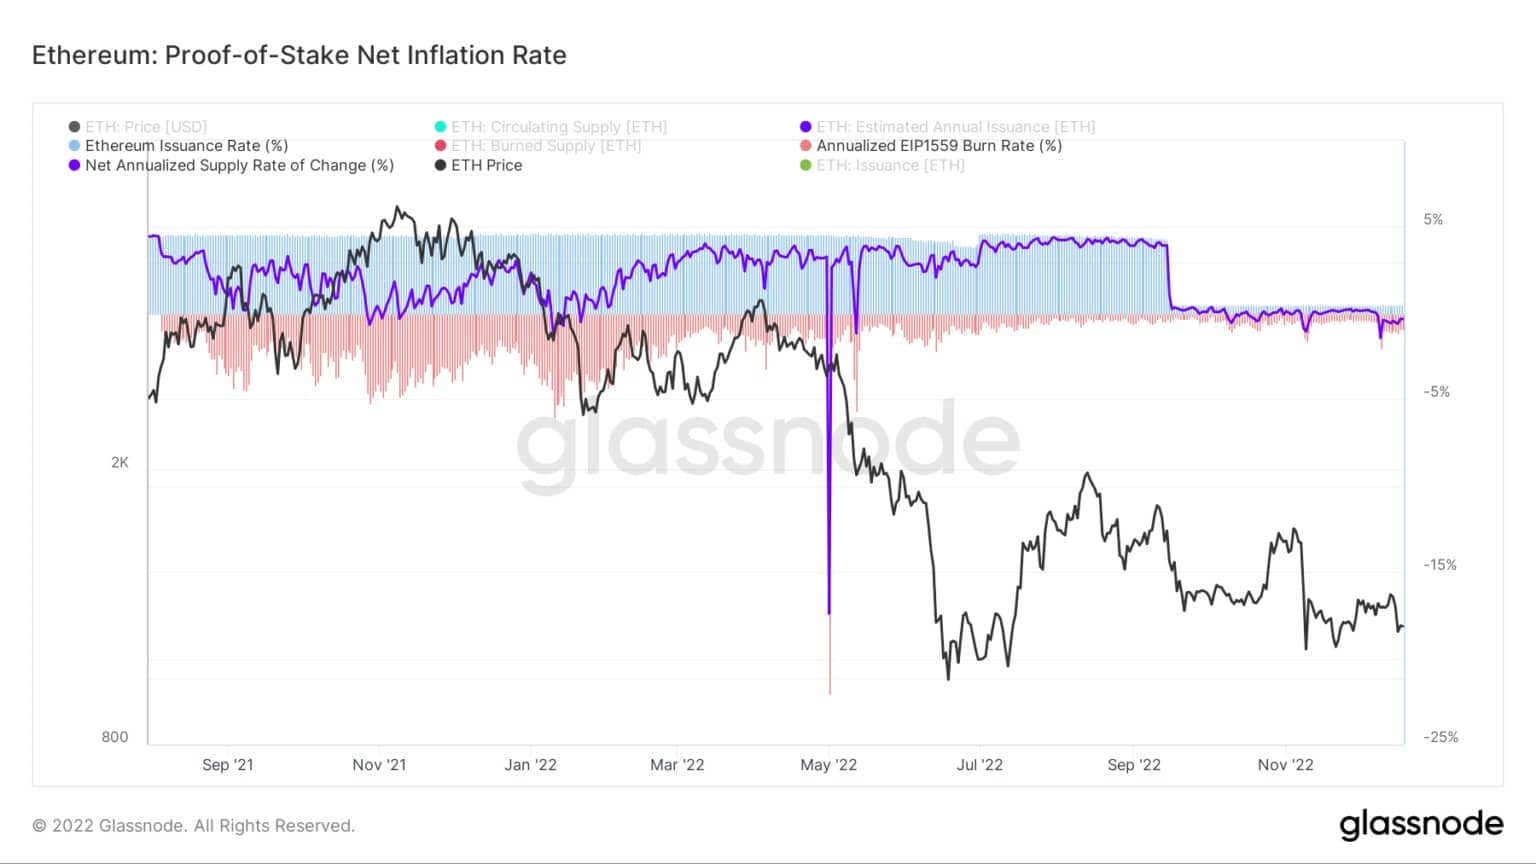 Ethereum : Proof of Stake Net Inflation Rate / Source : Glassnode.com